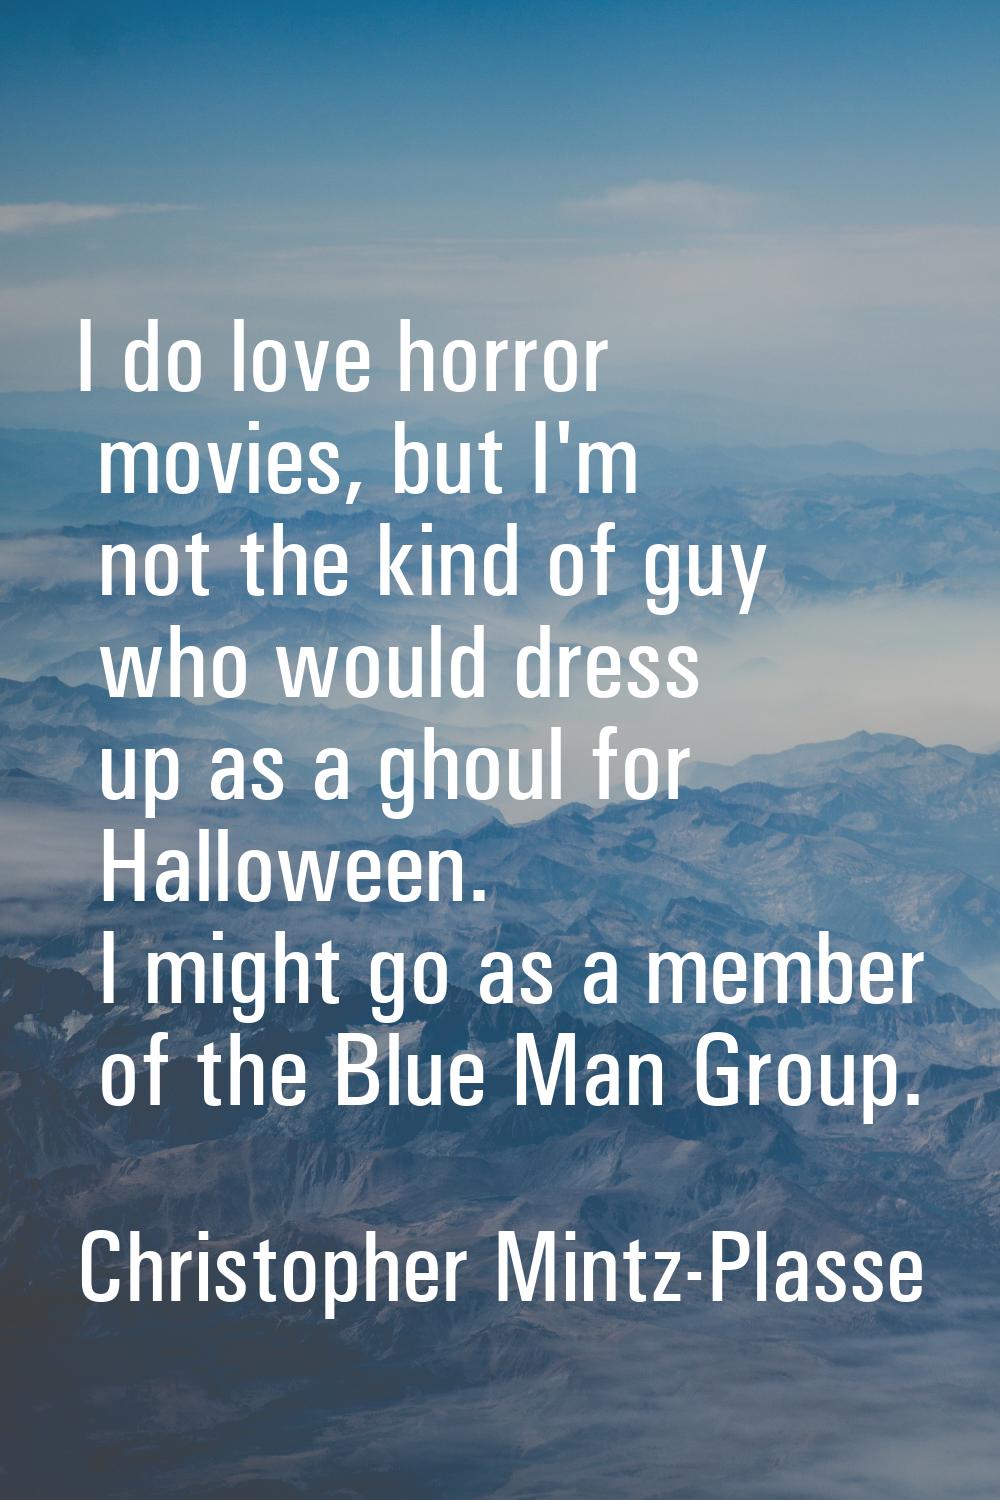 I do love horror movies, but I'm not the kind of guy who would dress up as a ghoul for Halloween. I